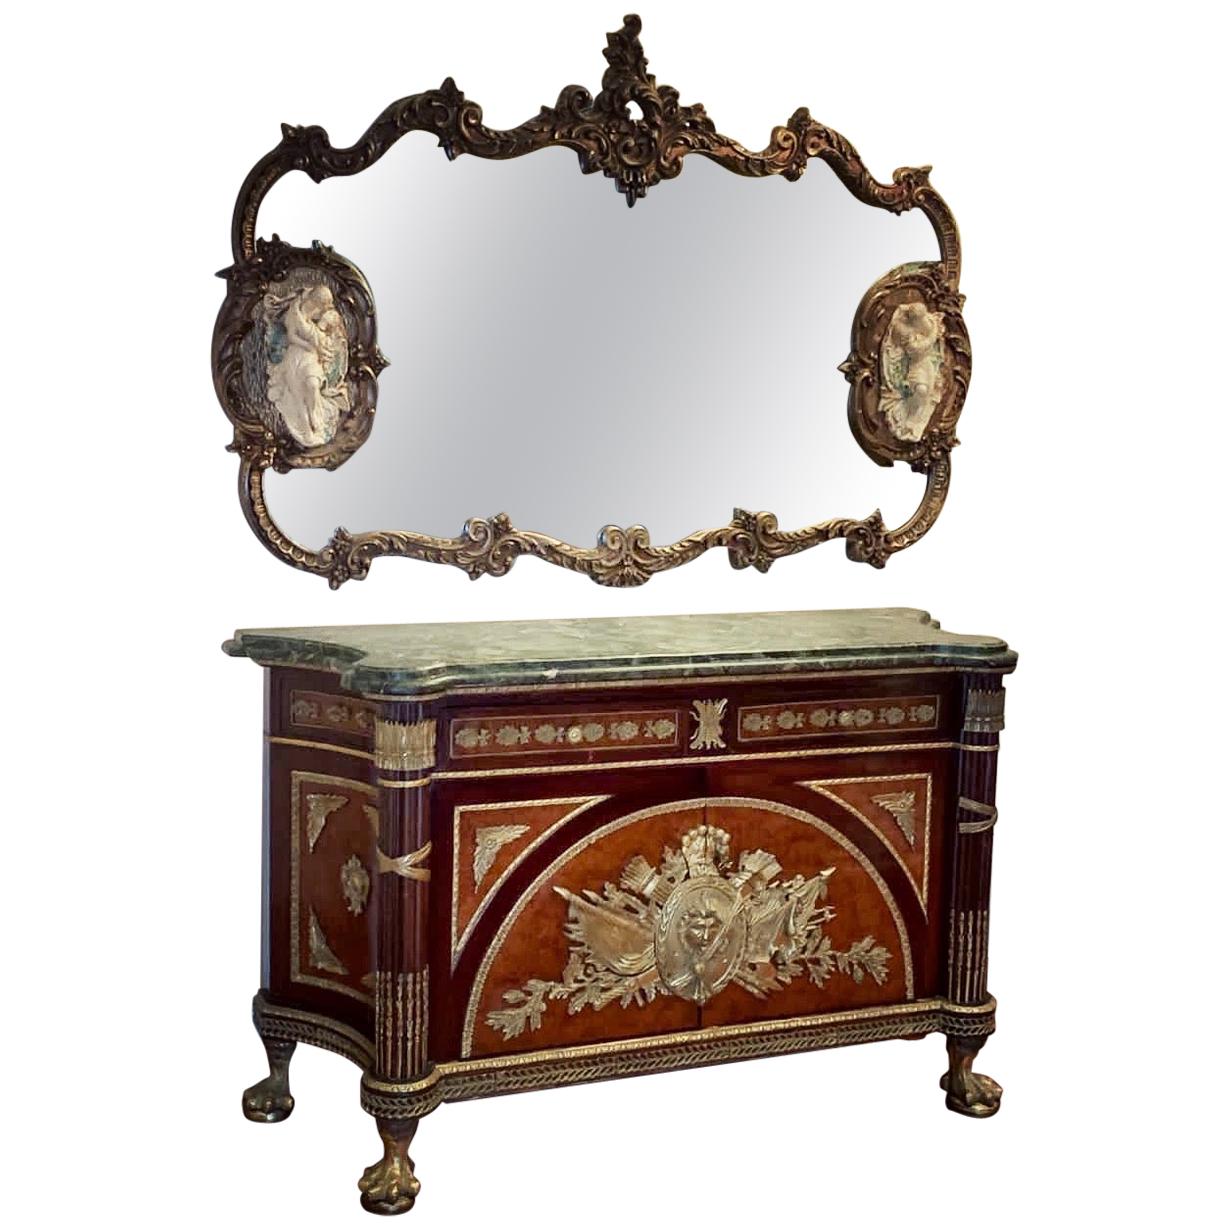 Fine French Ormolu-Mounted Commode a Vantaux with a Mirror, Late 19th Century